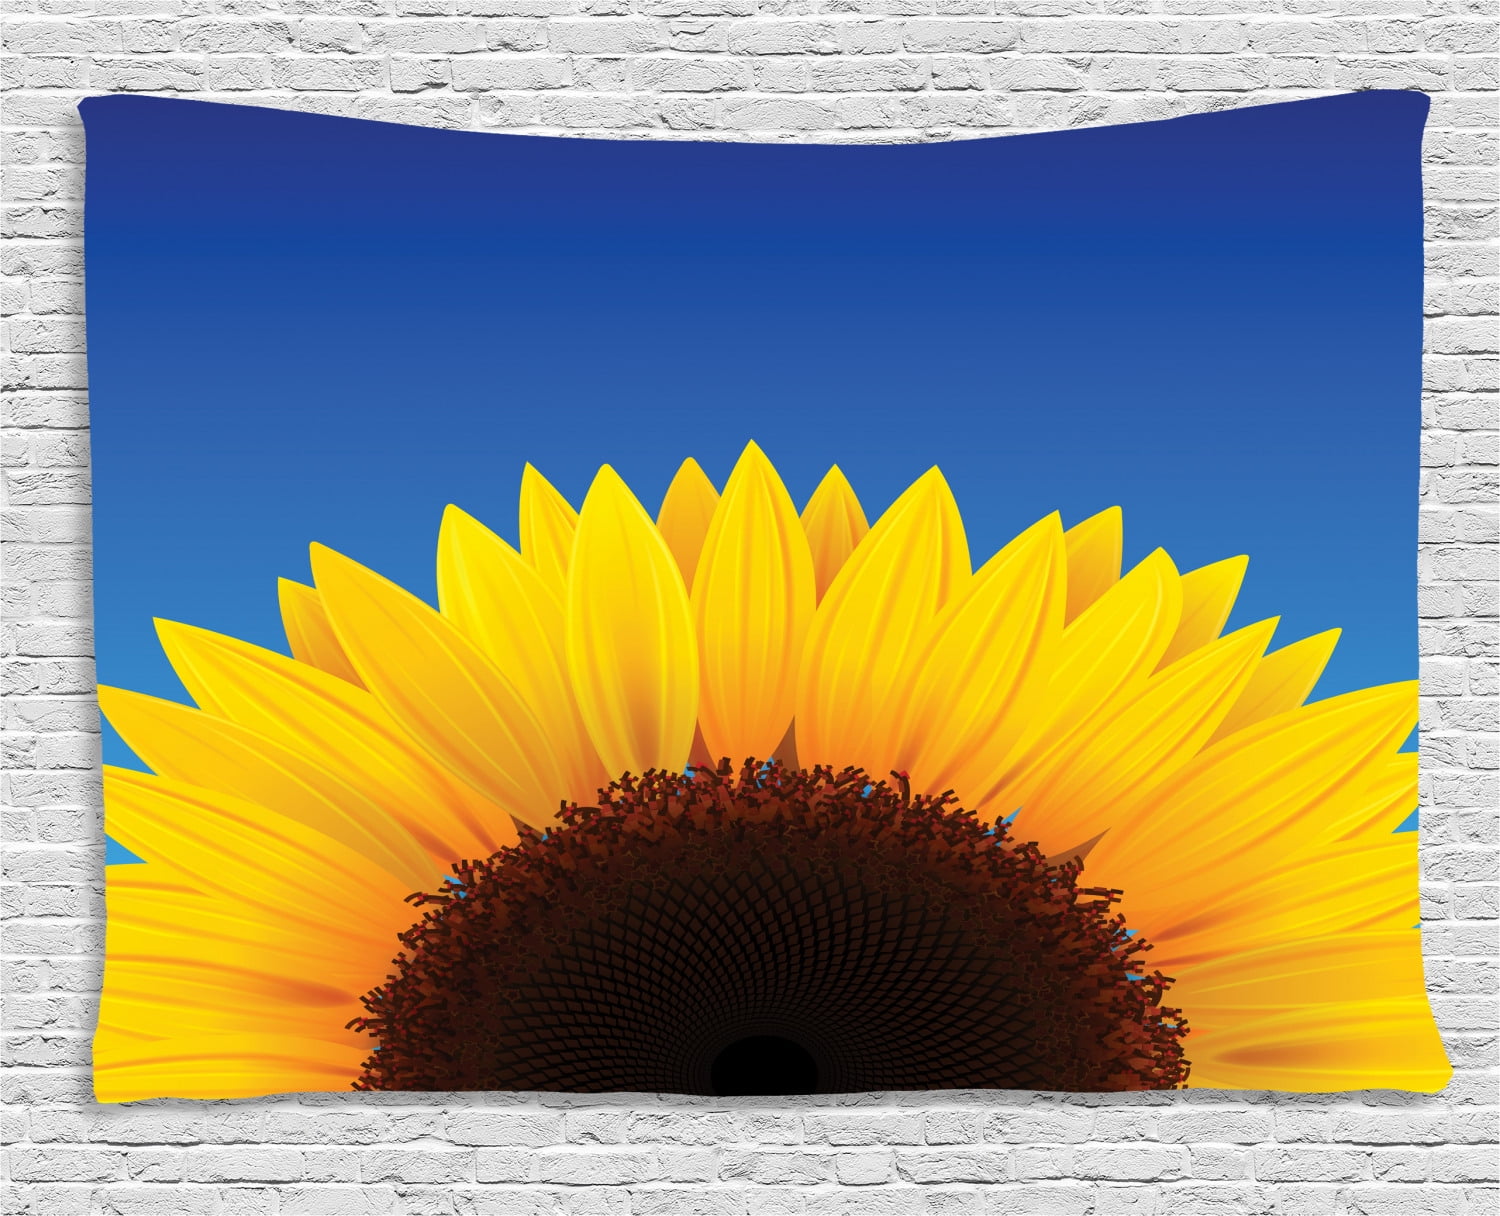 Yellow And Blue Tapestry Sunflower With Summer Sky Agriculture Themed Digital Design Wall Hanging For Bedroom Living Room Dorm Decor 80w X 60l